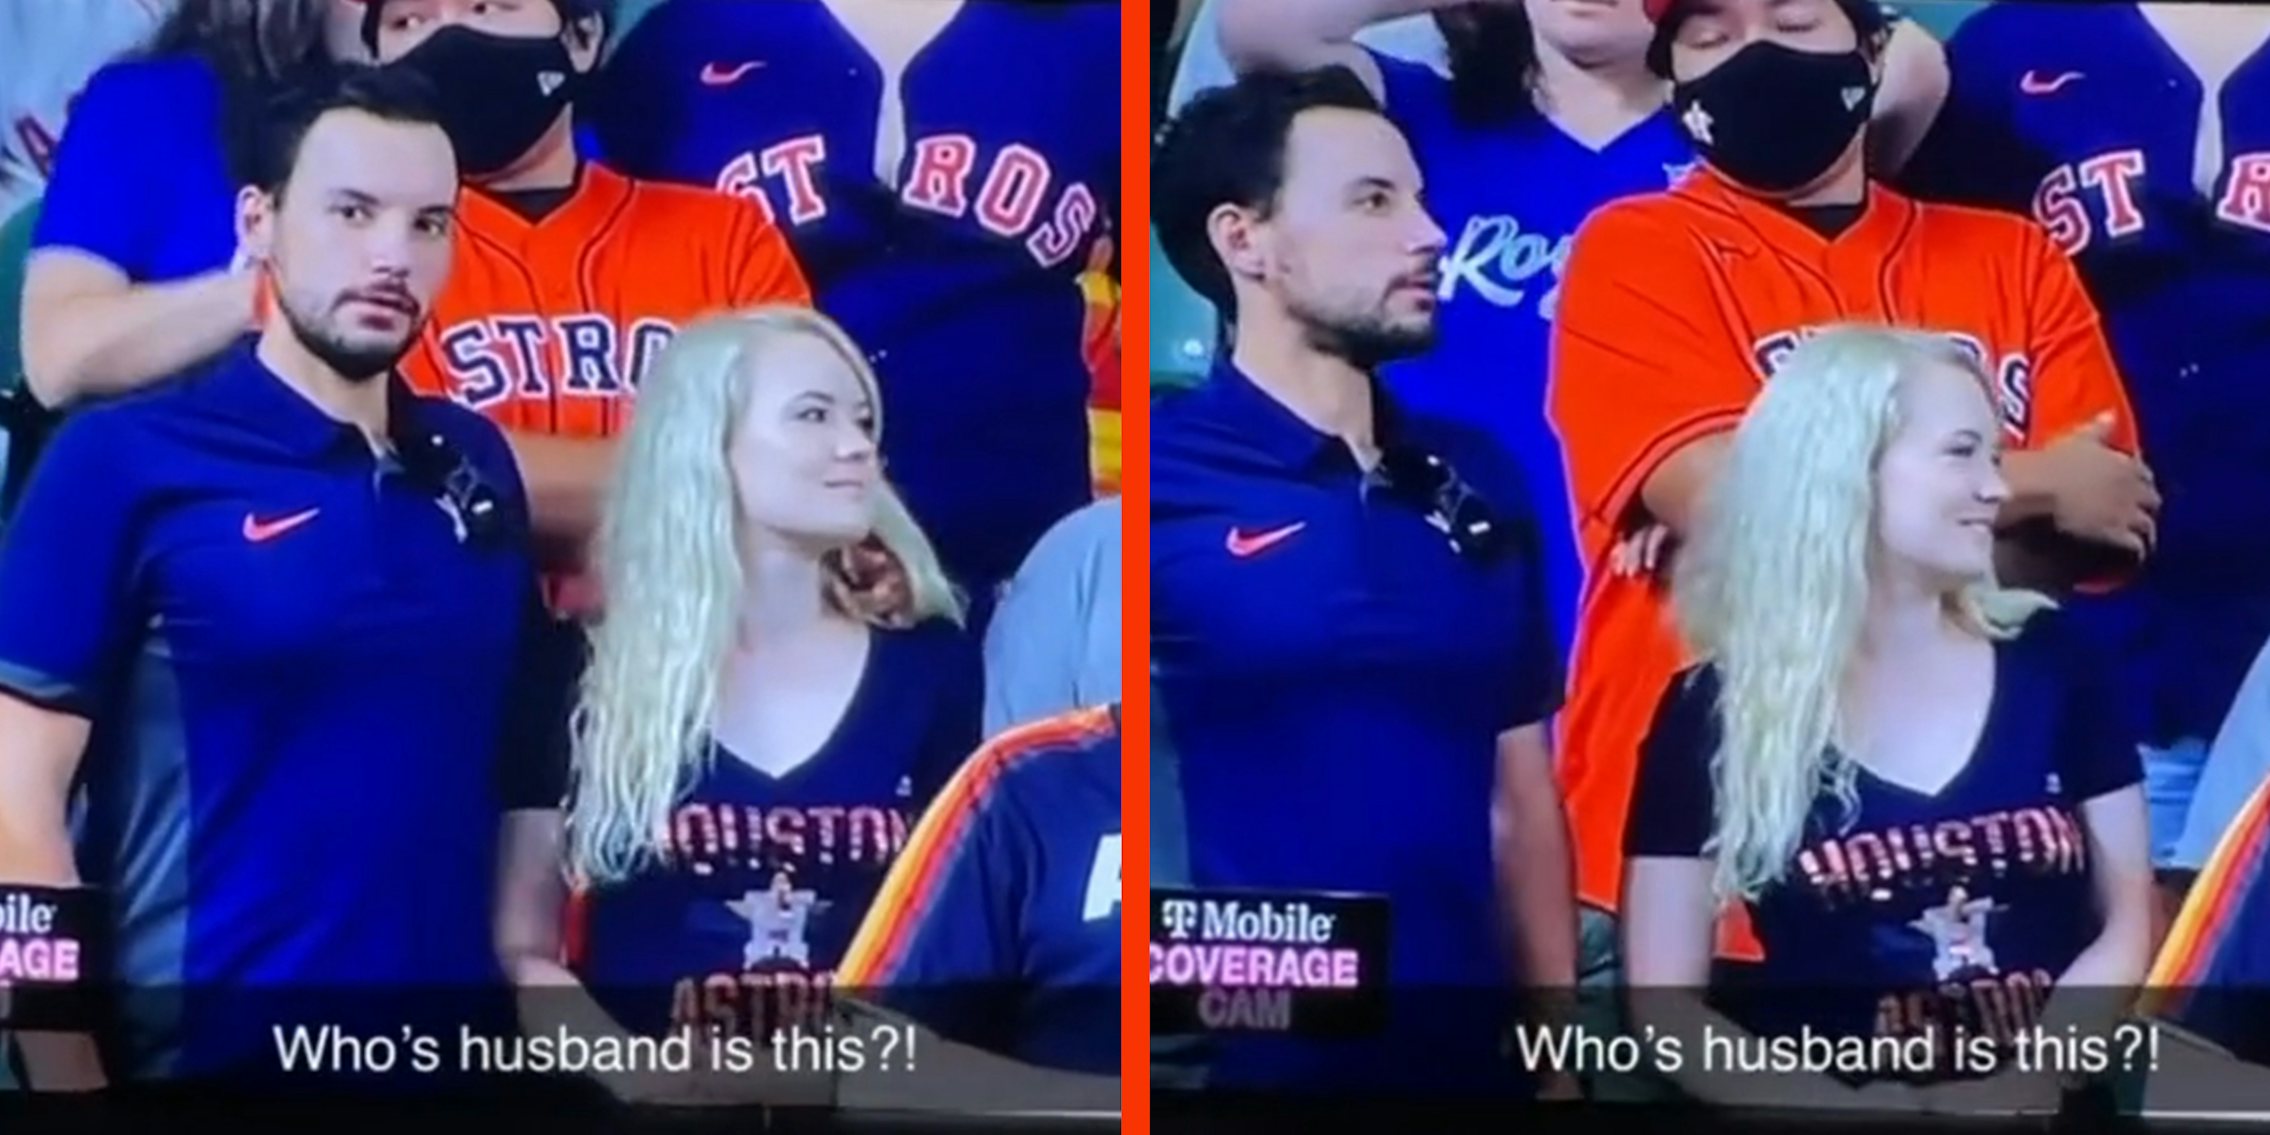 Astros fan acts super suspiciously when caught on camera in viral video